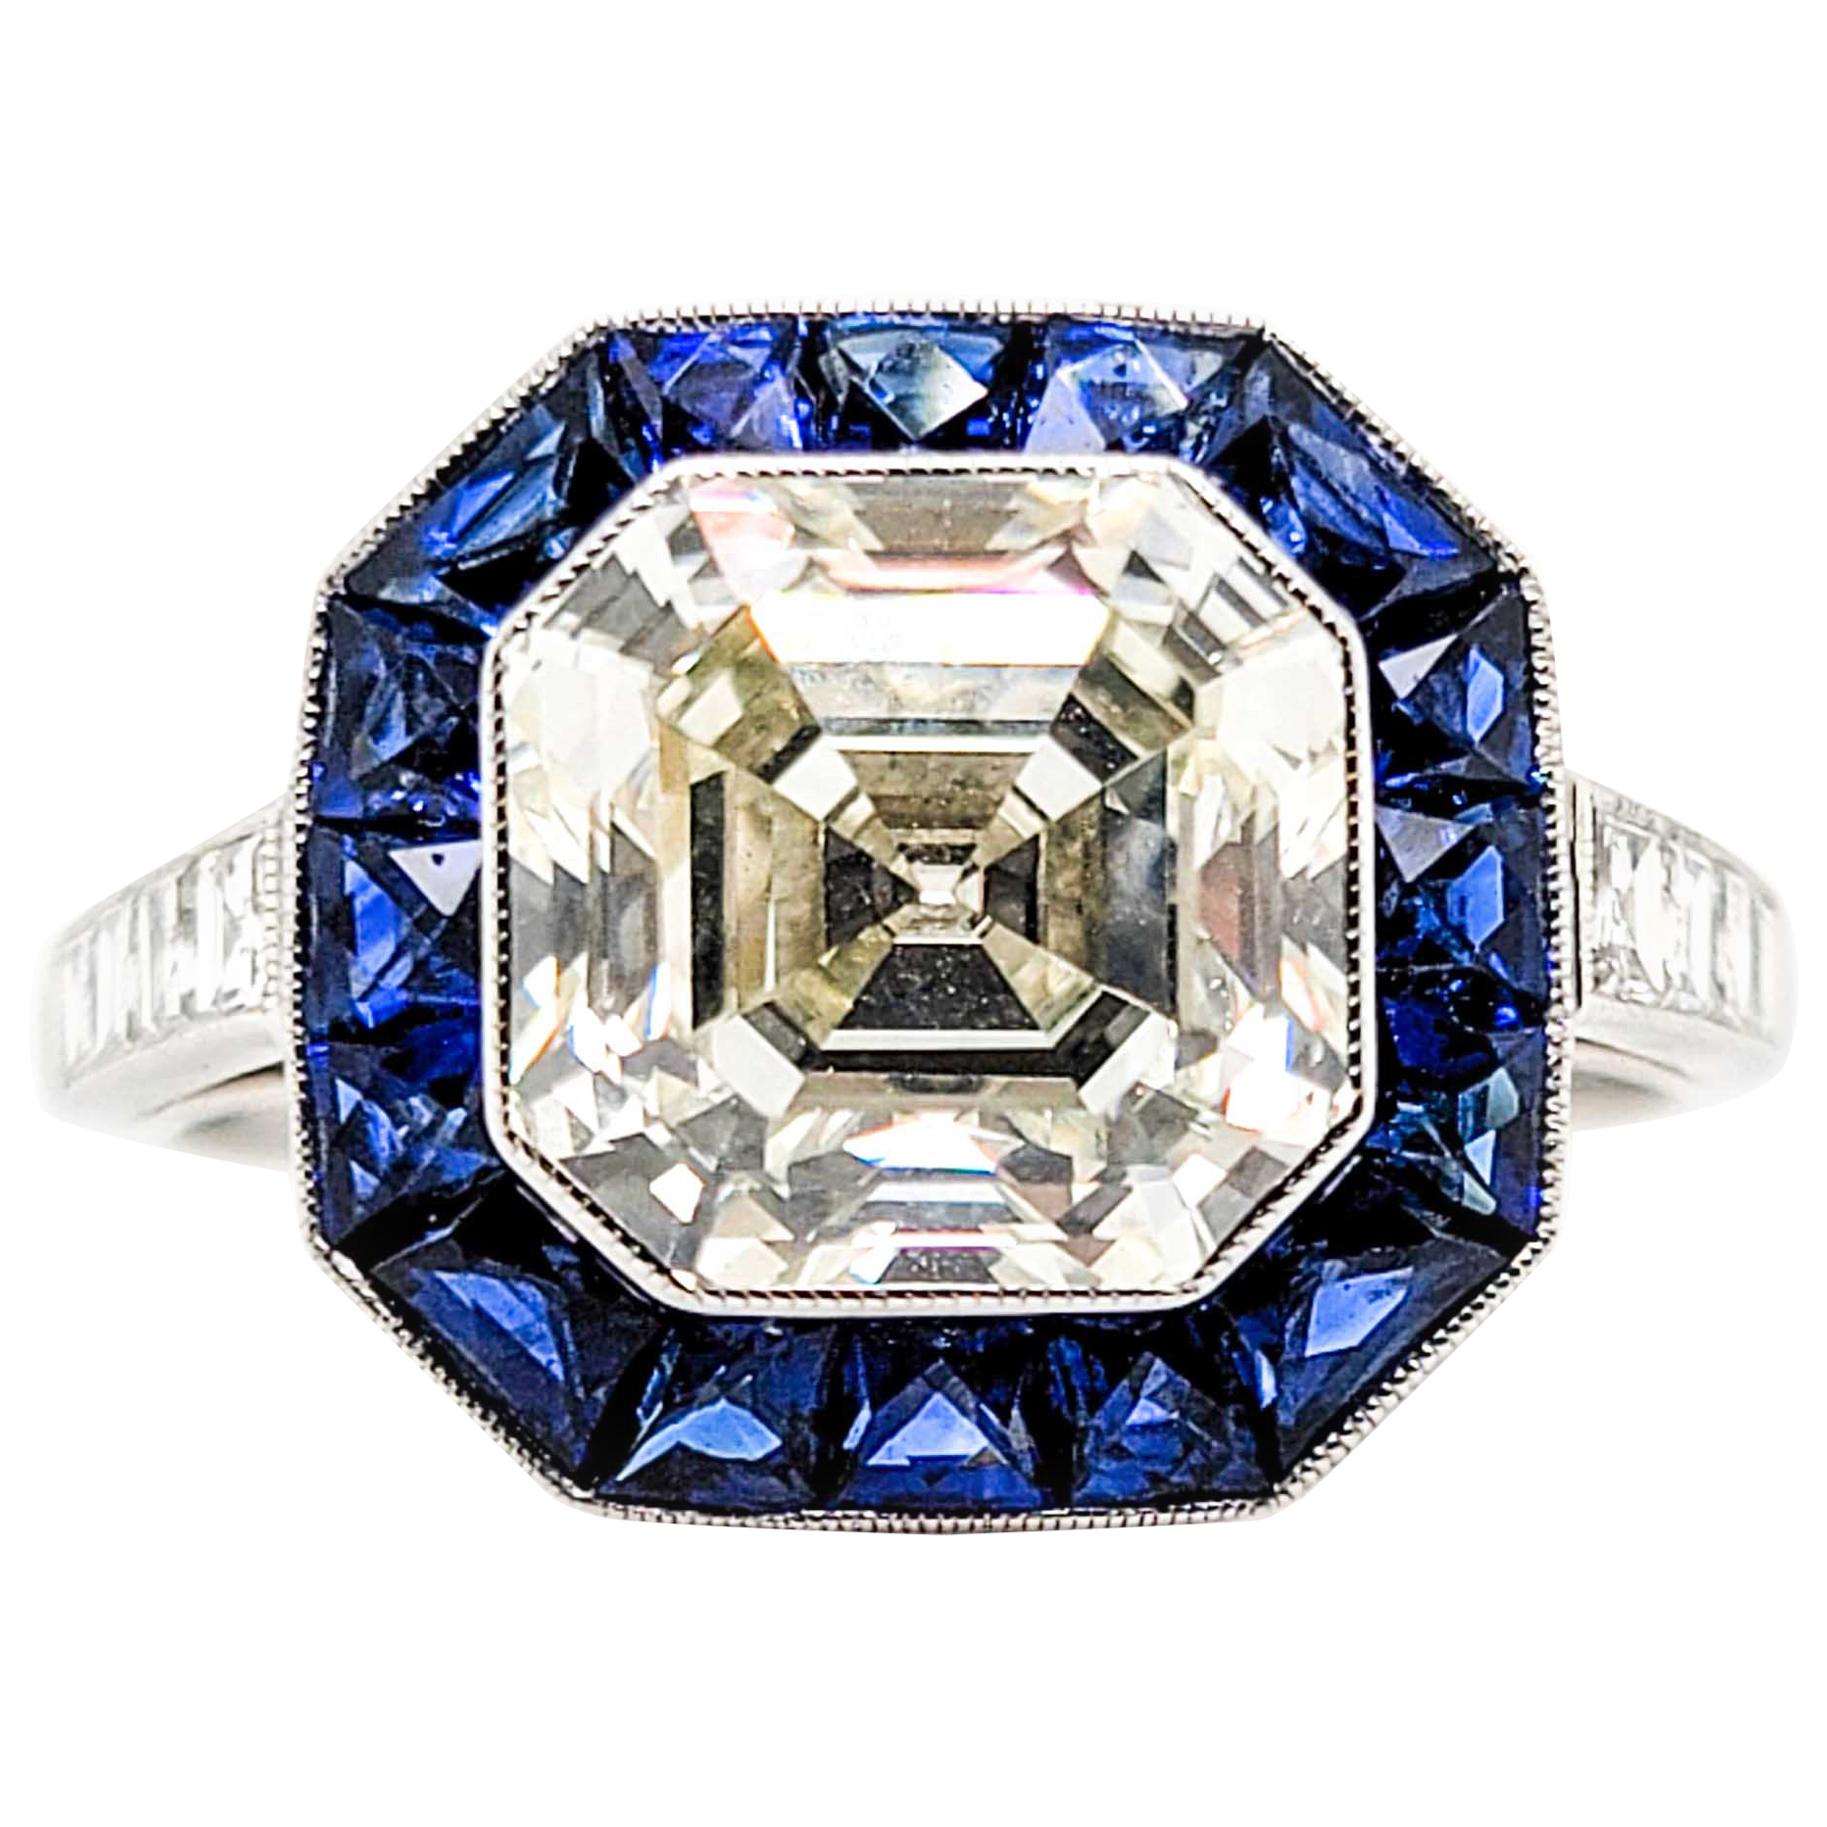 Sophia D GIA Certified 3.37 Carat Square Cut Diamond and Blue Sapphire Ring